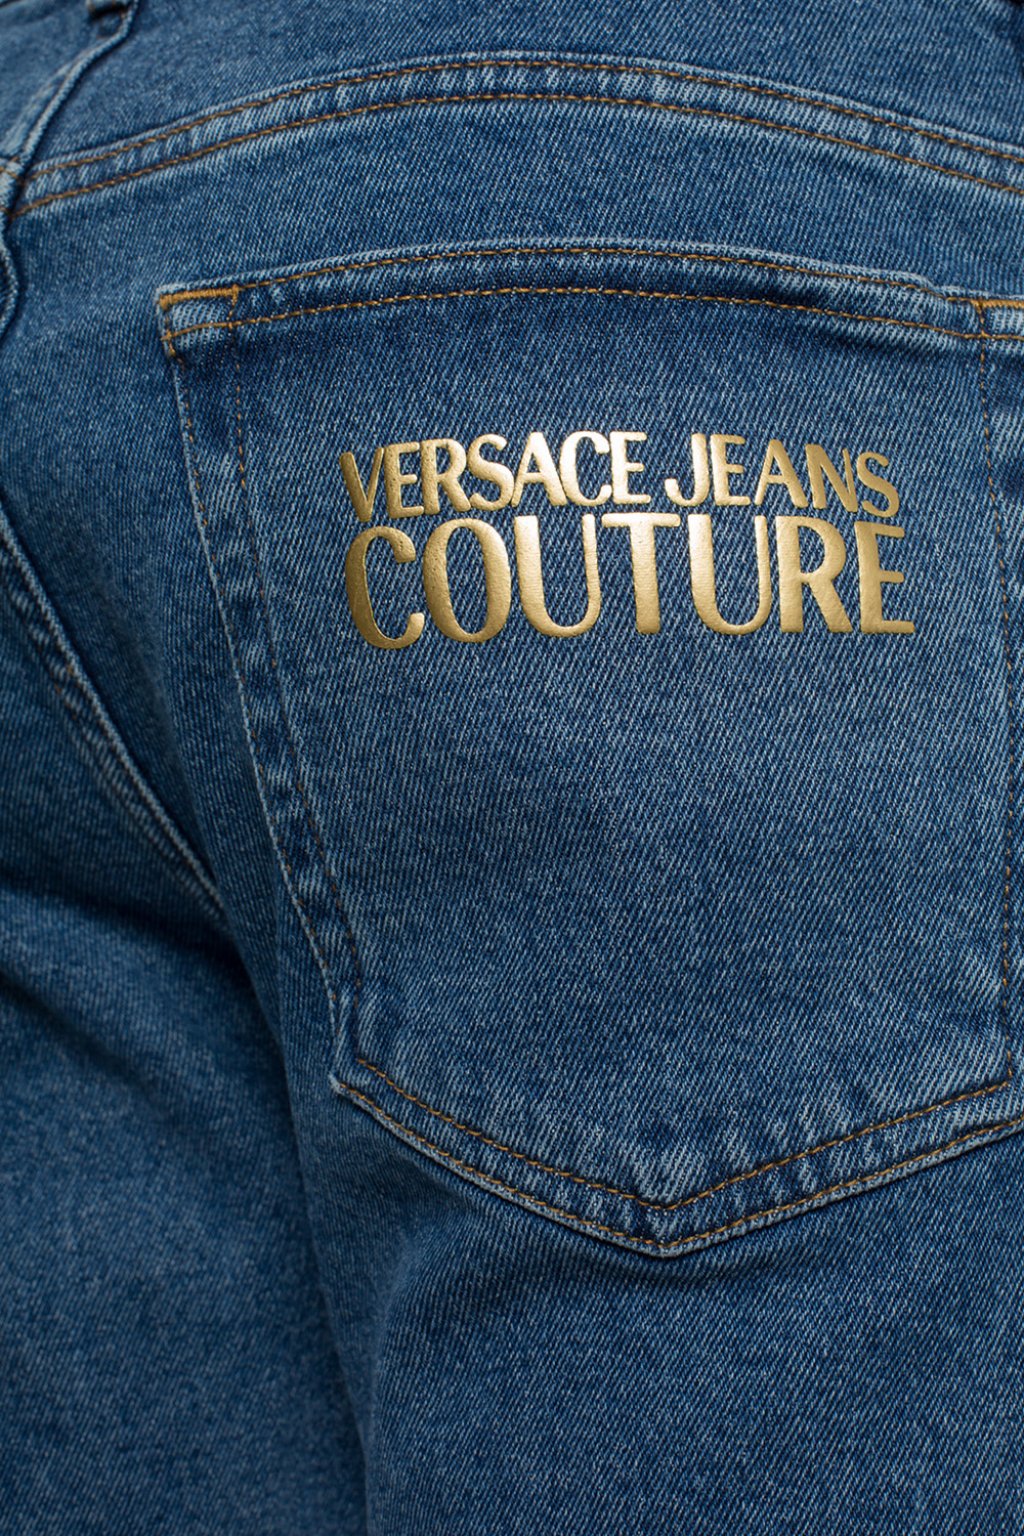 Branded jeans Versace Jeans Couture 